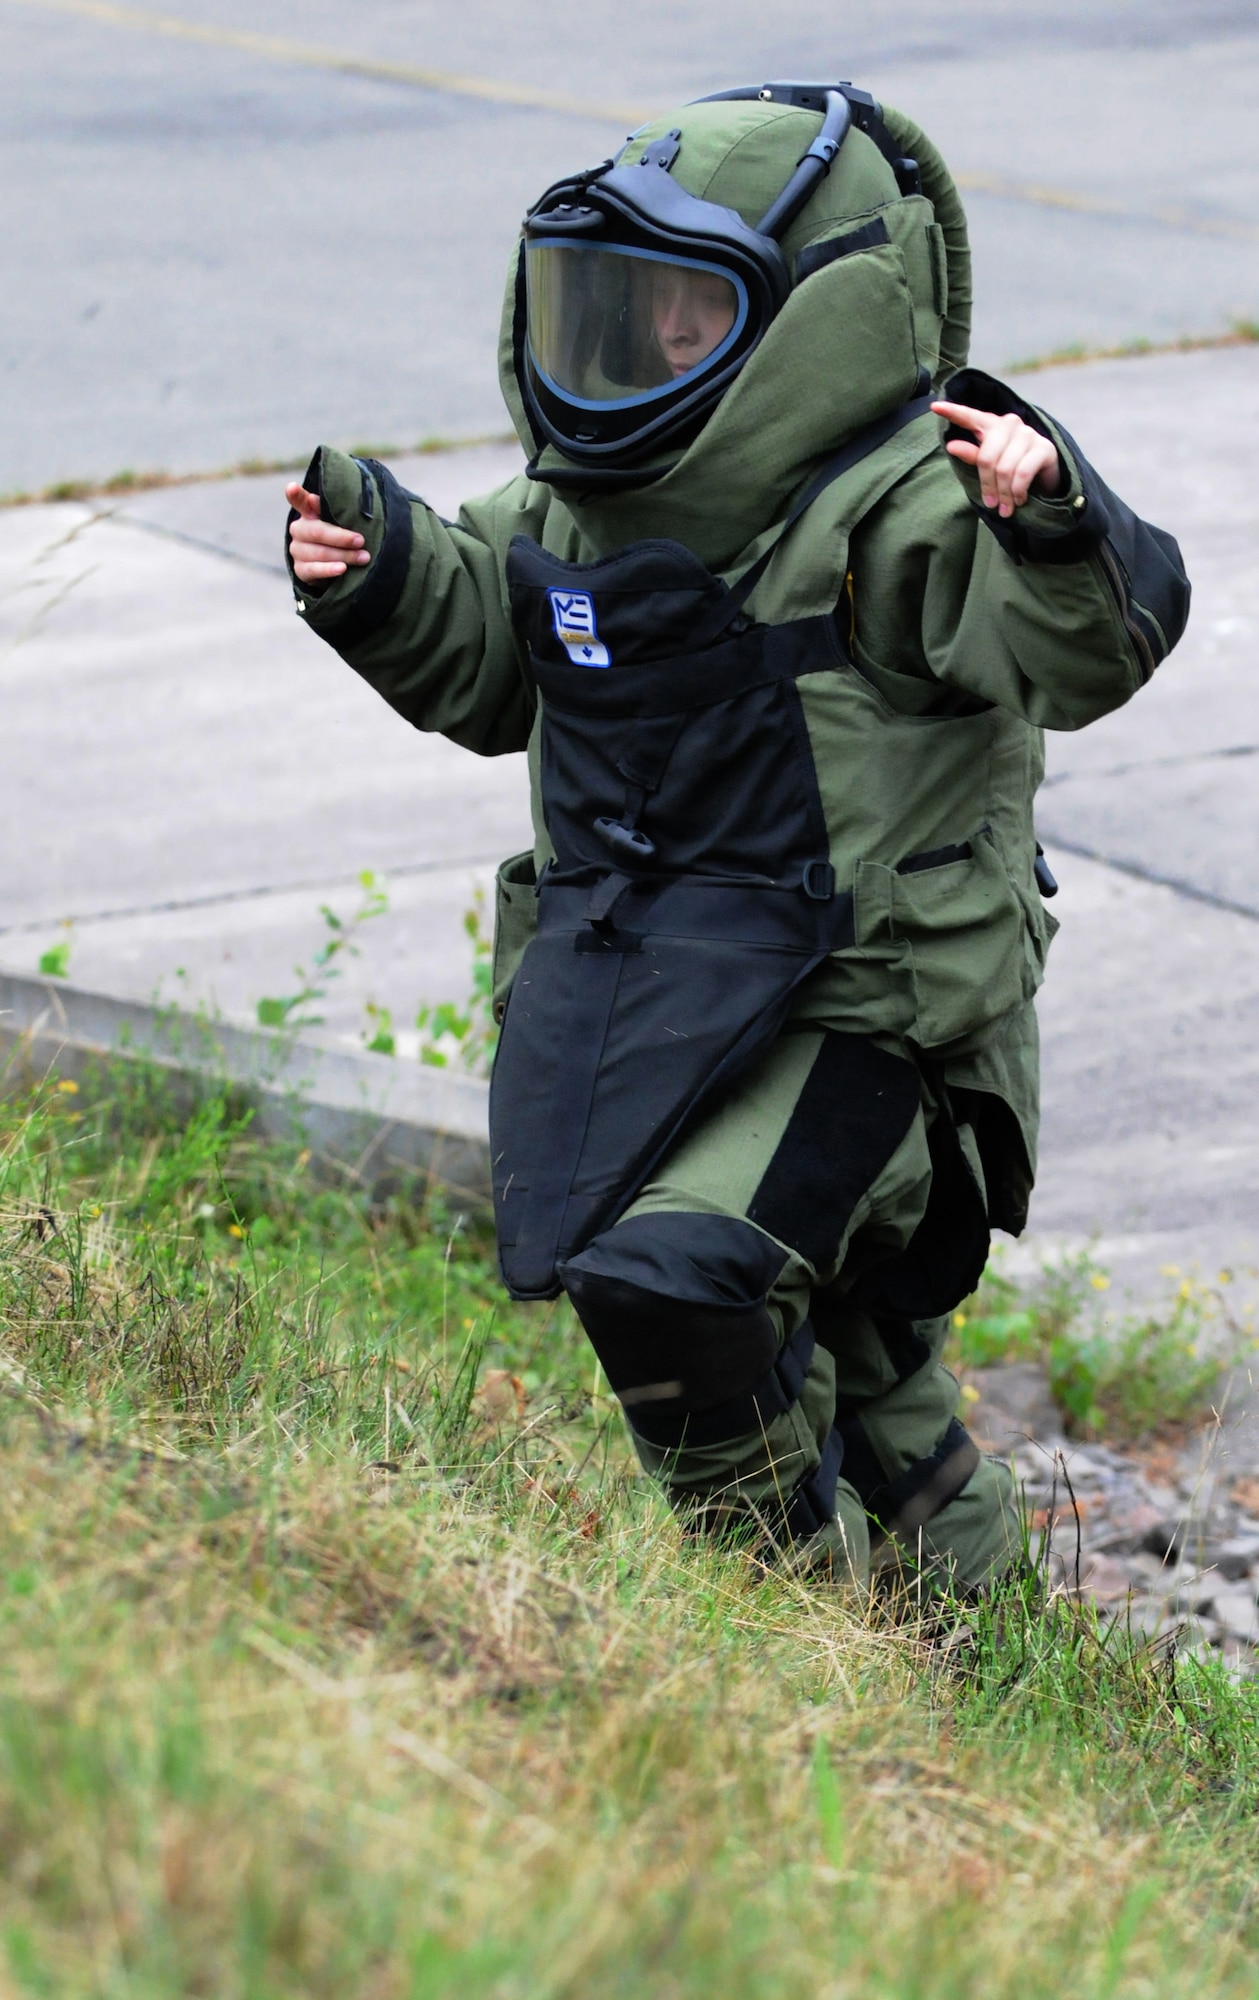 British Air Cadet, Cpl. Charlotte Bennetts native of Newcastle, England, climbs a hill in an explosive ordnance disposal bomb-suit that weighs approximately 75 lbs. during the cadets' visit to Ramstein Air Base, Germany, July 14, 2009. The cadets visited Ramstein for a week of leadership development and contingency skills training. (U.S. Air Force photo by Senior Airman Nathan Lipscomb)